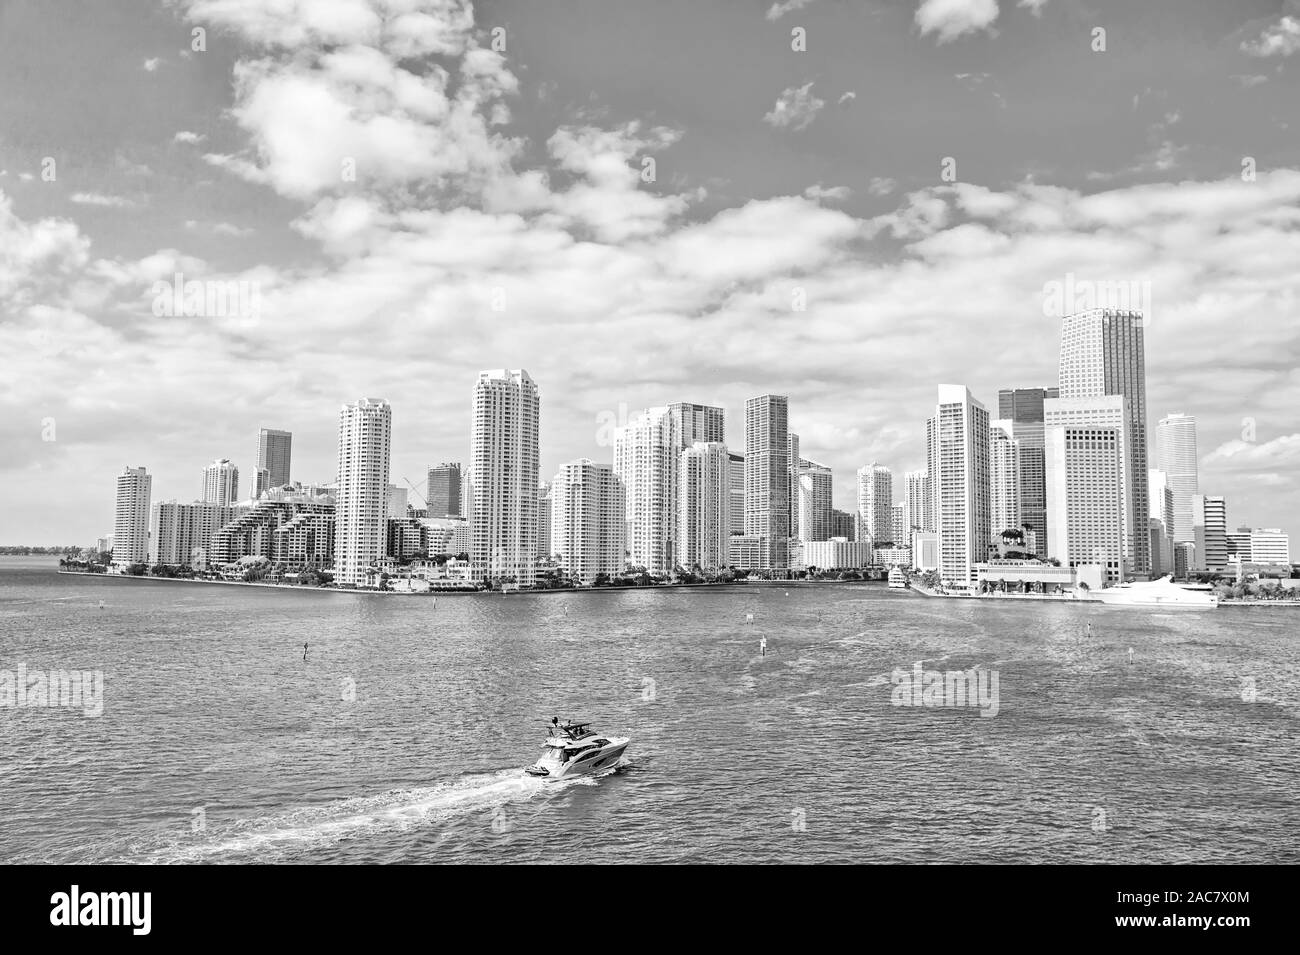 Business district Miami. Richness concept. Architecturally impressive high rise towers. Skyscrapers and harbor. Must see attractions. Miami waterfront lined with marinas. Downtown Miami city center. Stock Photo